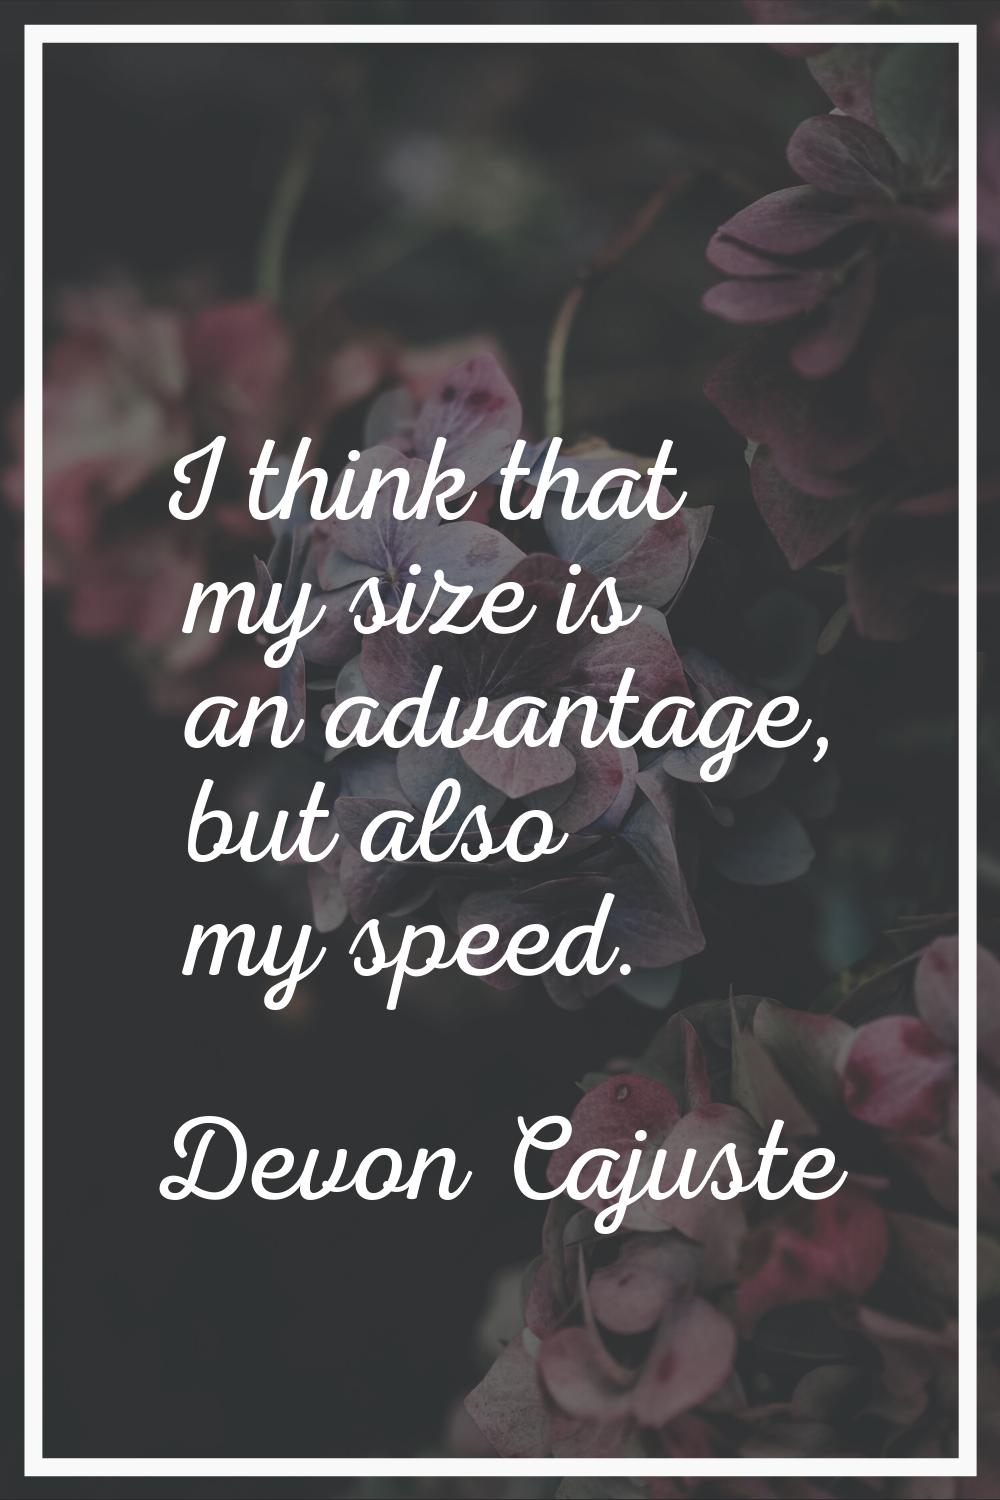 I think that my size is an advantage, but also my speed.